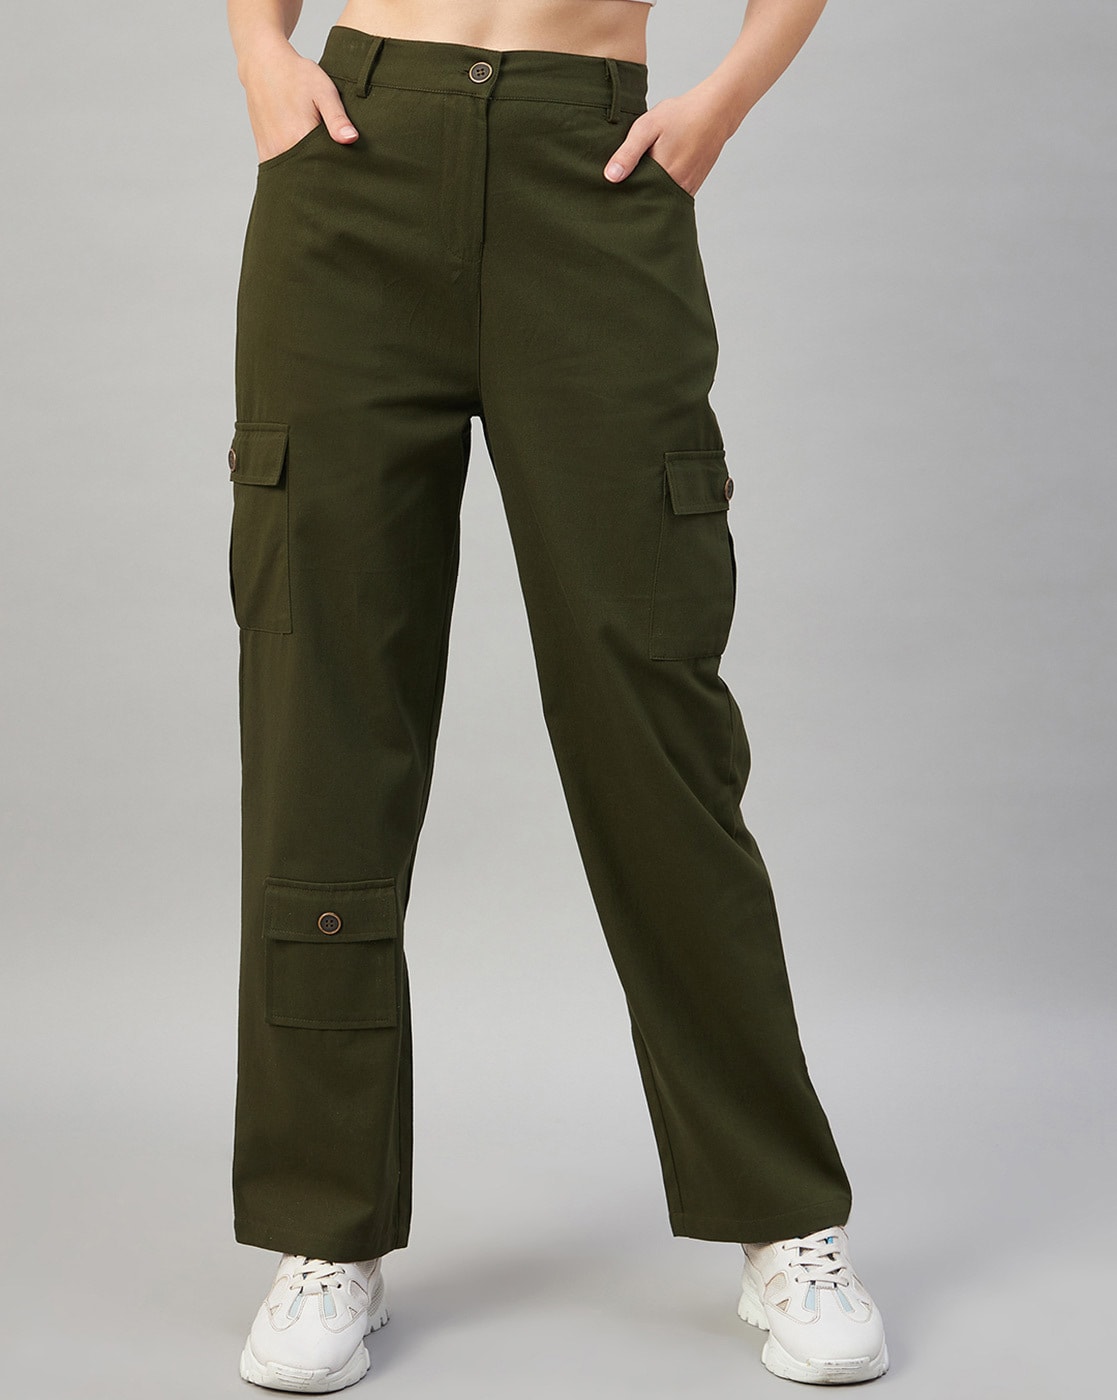 Low-waisted cargo trousers - Khaki green - Ladies | H&M IN